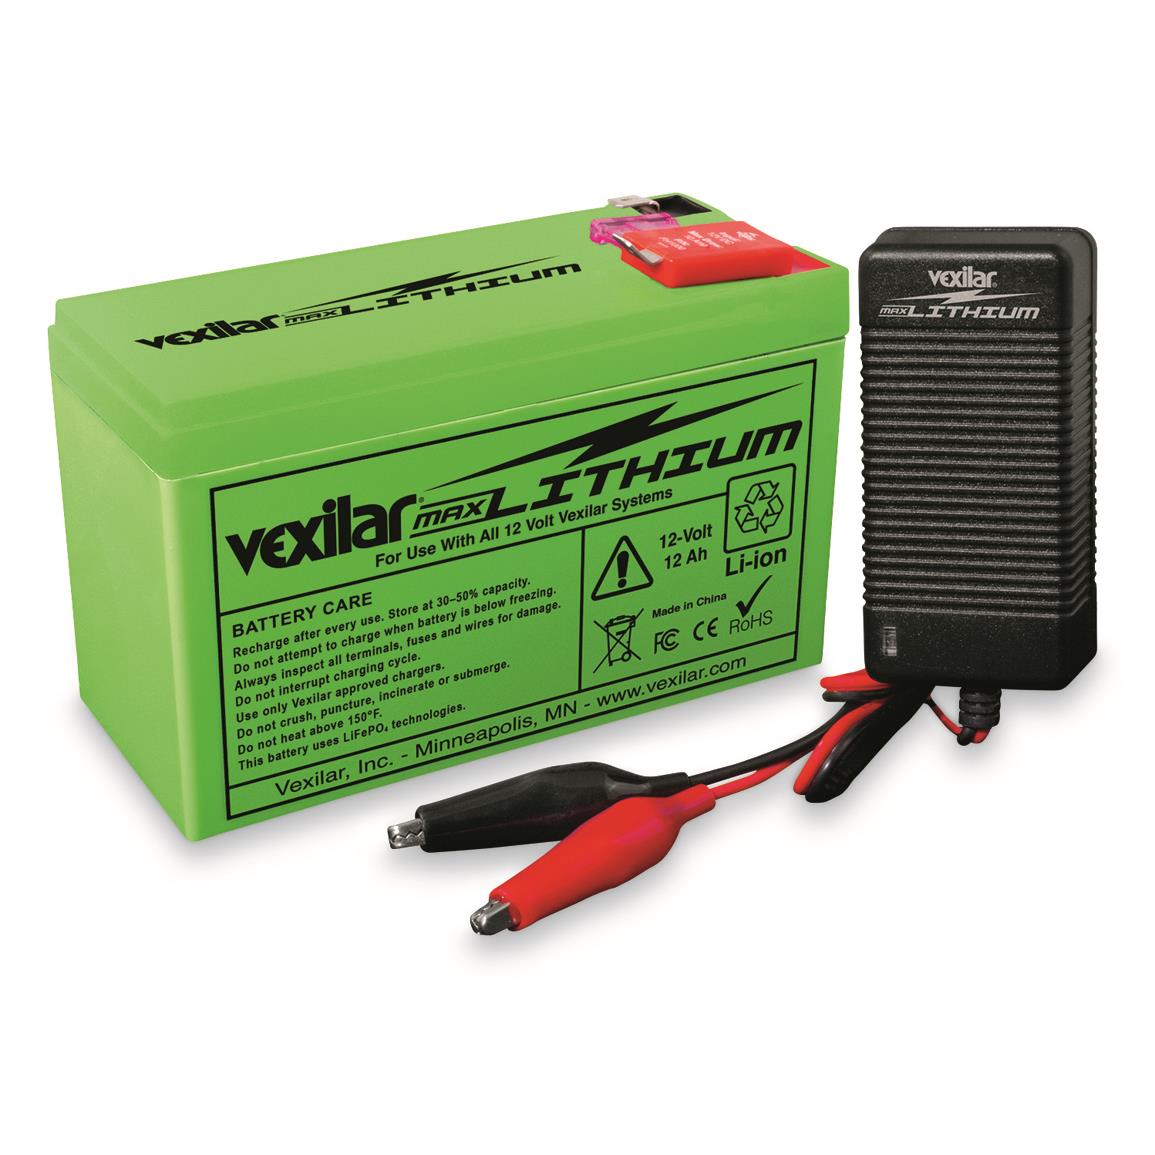 Includes Vexilar charger